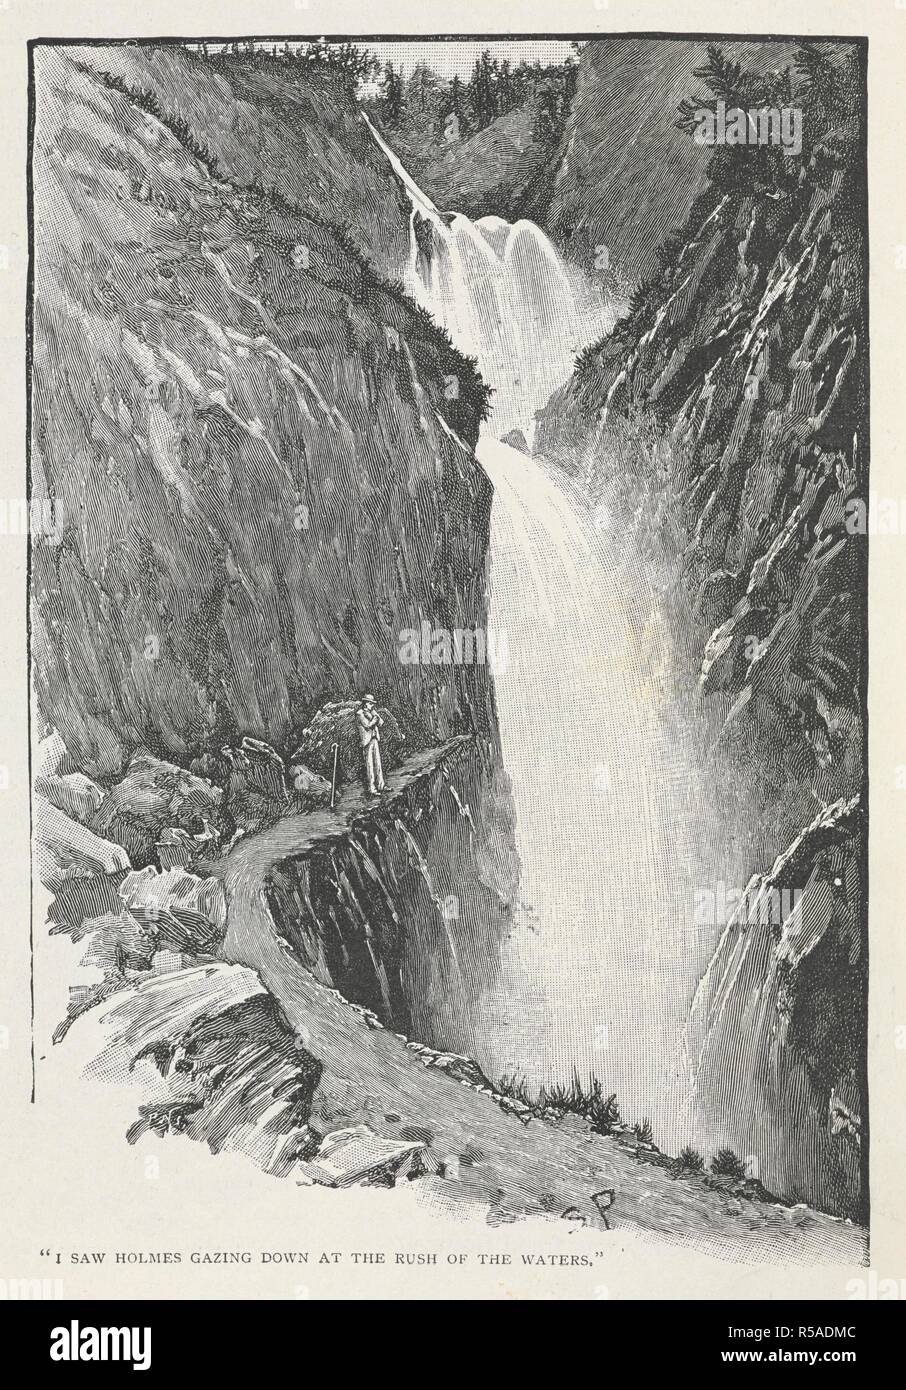 'I saw Holmes gazing down at the rush of the waters'. Sherlock Holmes standing at the Reichenbach falls. Illustration for the story 'the adventure of the final problem'. The Strand magazine : an illustrated monthly / edited by G. Newnes. London : George Newnes. 1893. July to December. Source: P.P.6004.glk page 568. Author: DOYLE, ARTHUR CONAN. Paget, Sydney. Stock Photo